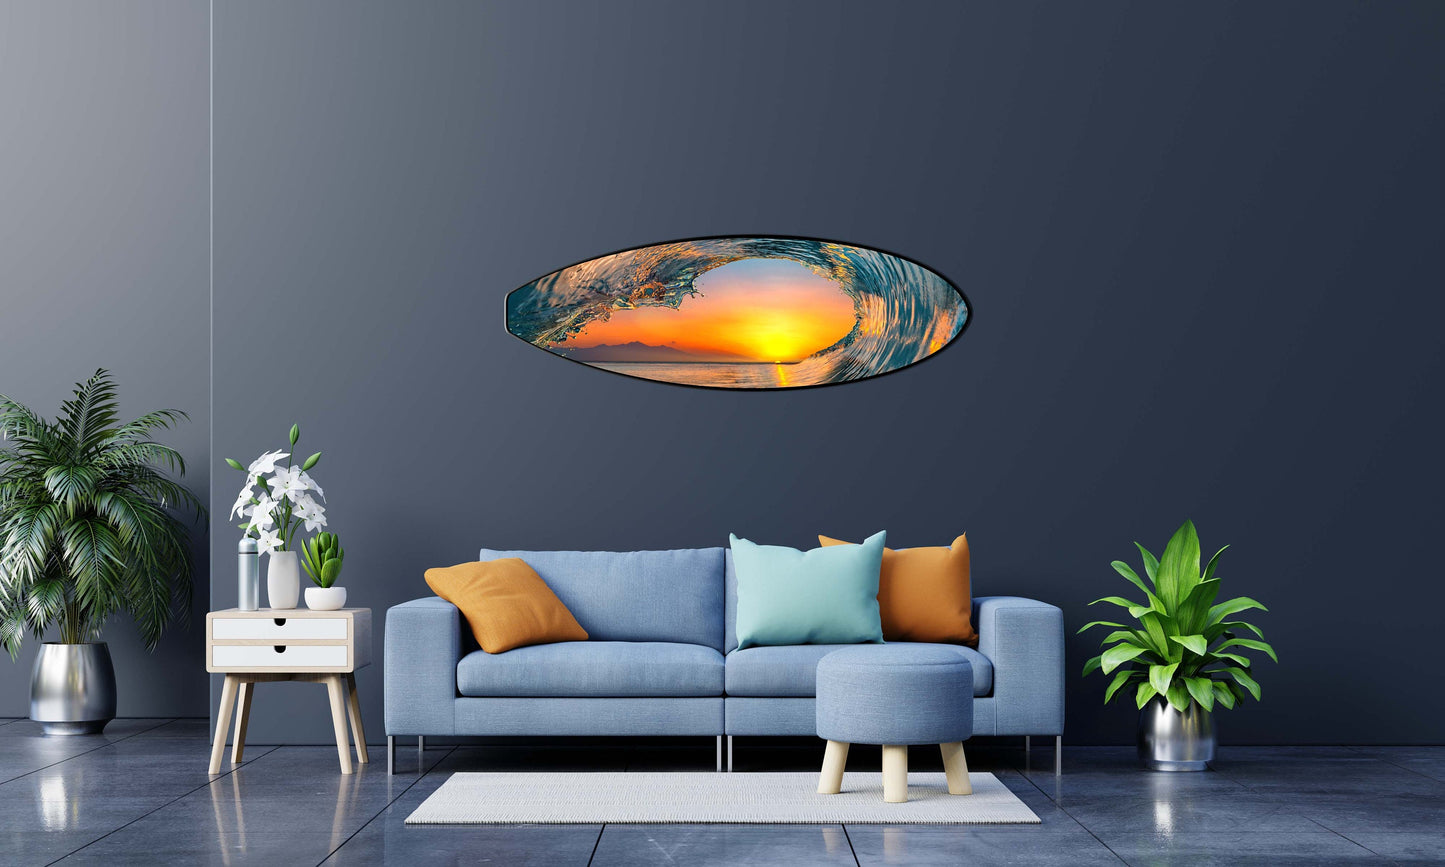 Vibrant Sunset Wave: Decorative Surfboard-Shaped Seascape Wall Hanging